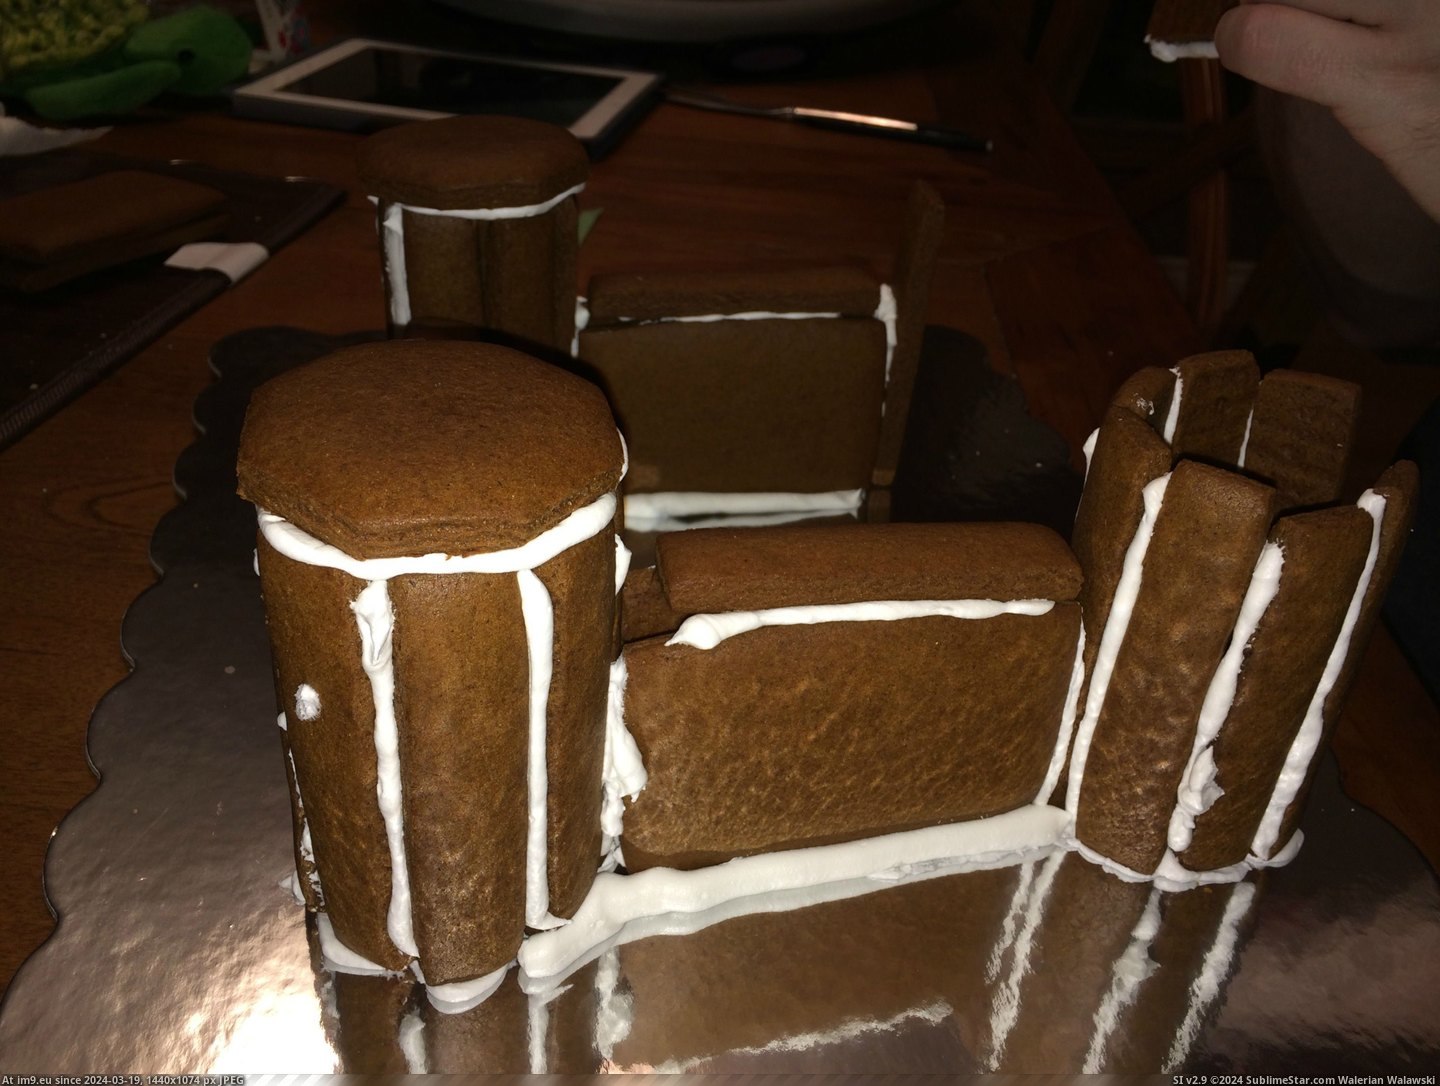 #Husband #Get #Our #Divorced #Collaborated #Project #Gingerbread #Success [Pics] My husband and I collaborated on our first gingerbread project and didn't get divorced...success! 17 Pic. (Image of album My r/PICS favs))